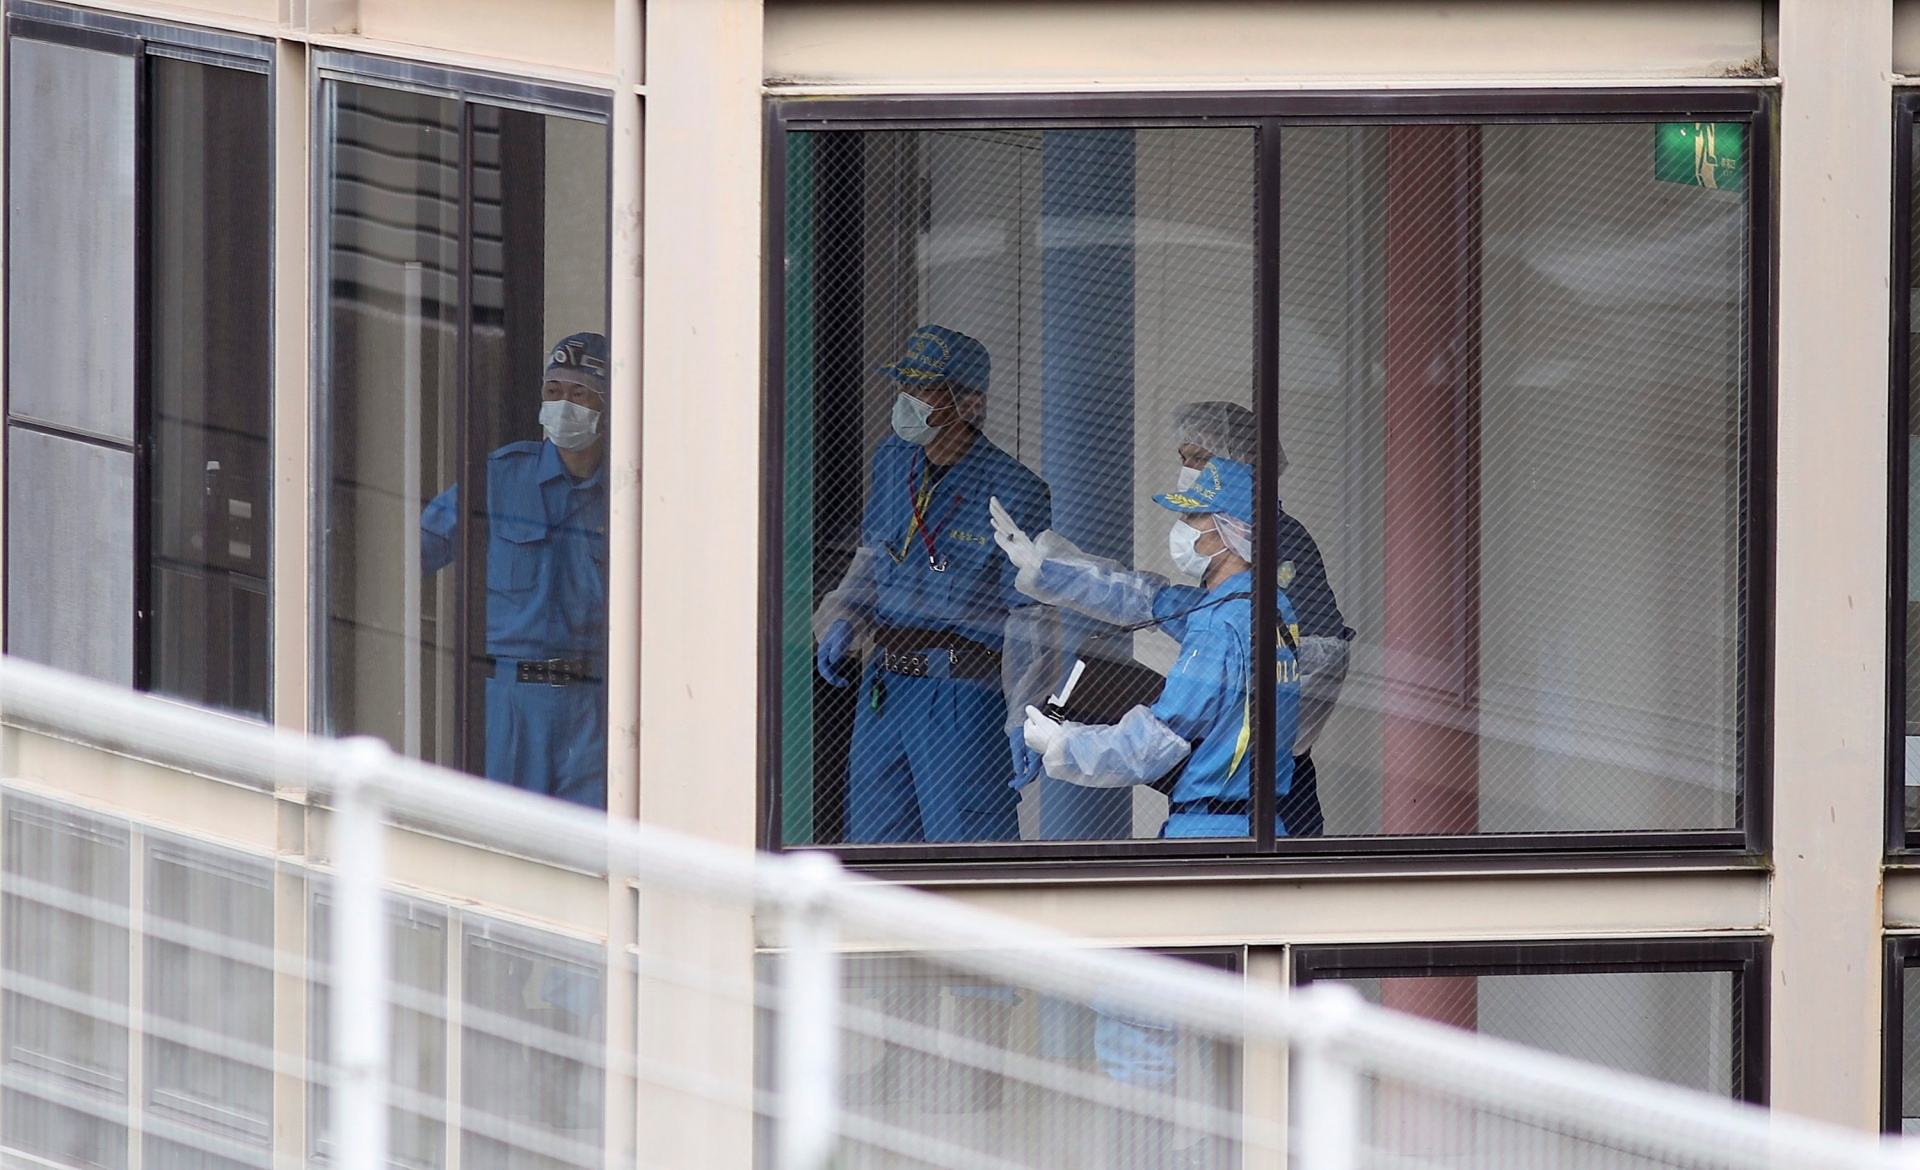 Police investigators work at the Tsukui Yamayuri-en, a facility for the disabled where a number of people were killed and dozens injured in a knife attack in Sagamihara, outside Tokyo Tuesday, July 26, 2016. Police said they responded to a call at about 2:30 a.m. from an employee saying something horrible was happening at the facility in the city of Sagamihara, 50 kilometers (30 miles) west of Tokyo. A man turned himself in at a police station about two hours later, police said.(AP Photo/Eugene Hoshiko) Japan Knife Attack